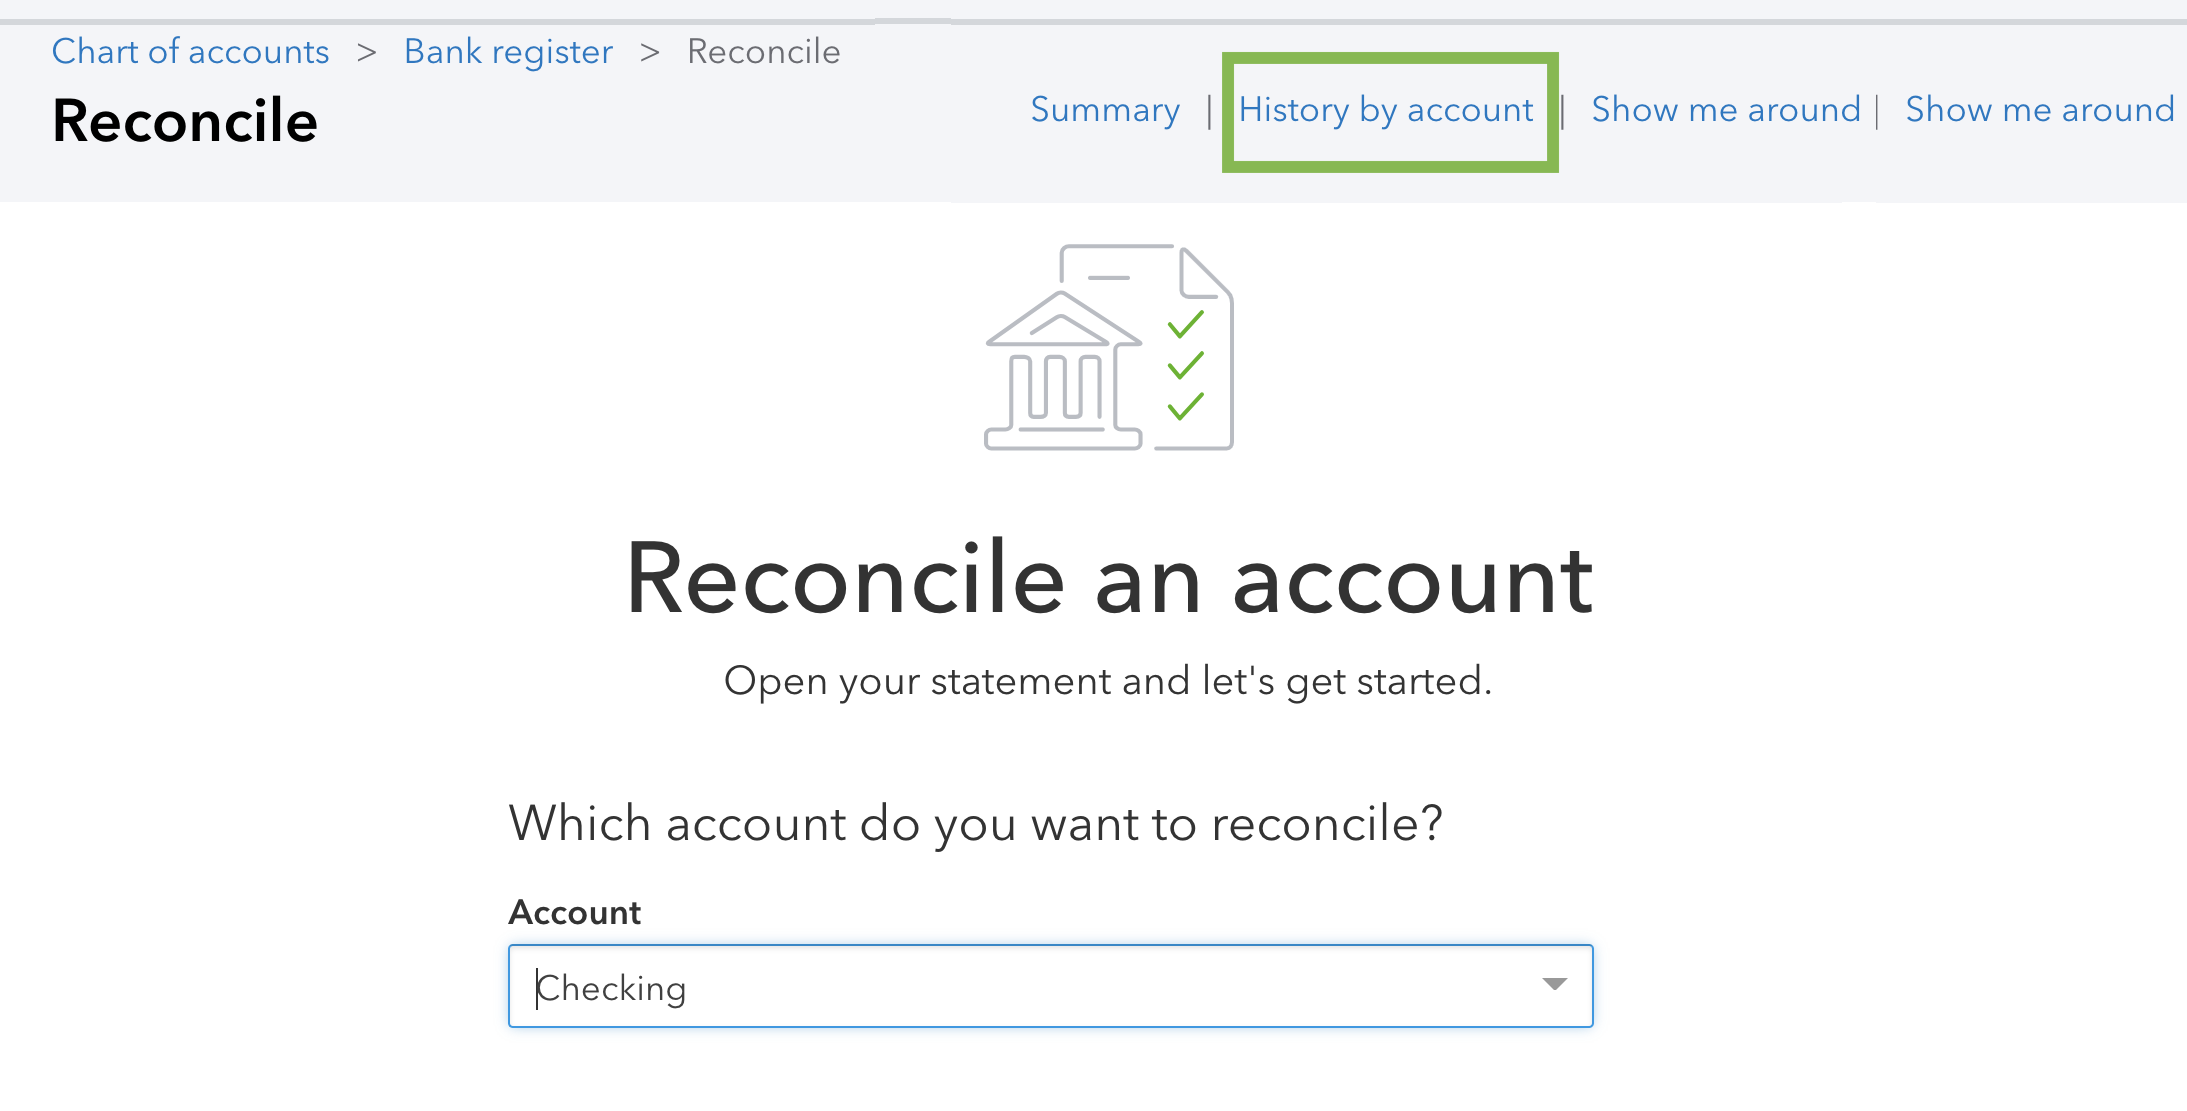 How to Undo a Bank Reconciliation in Intuit QuickBooks Online?